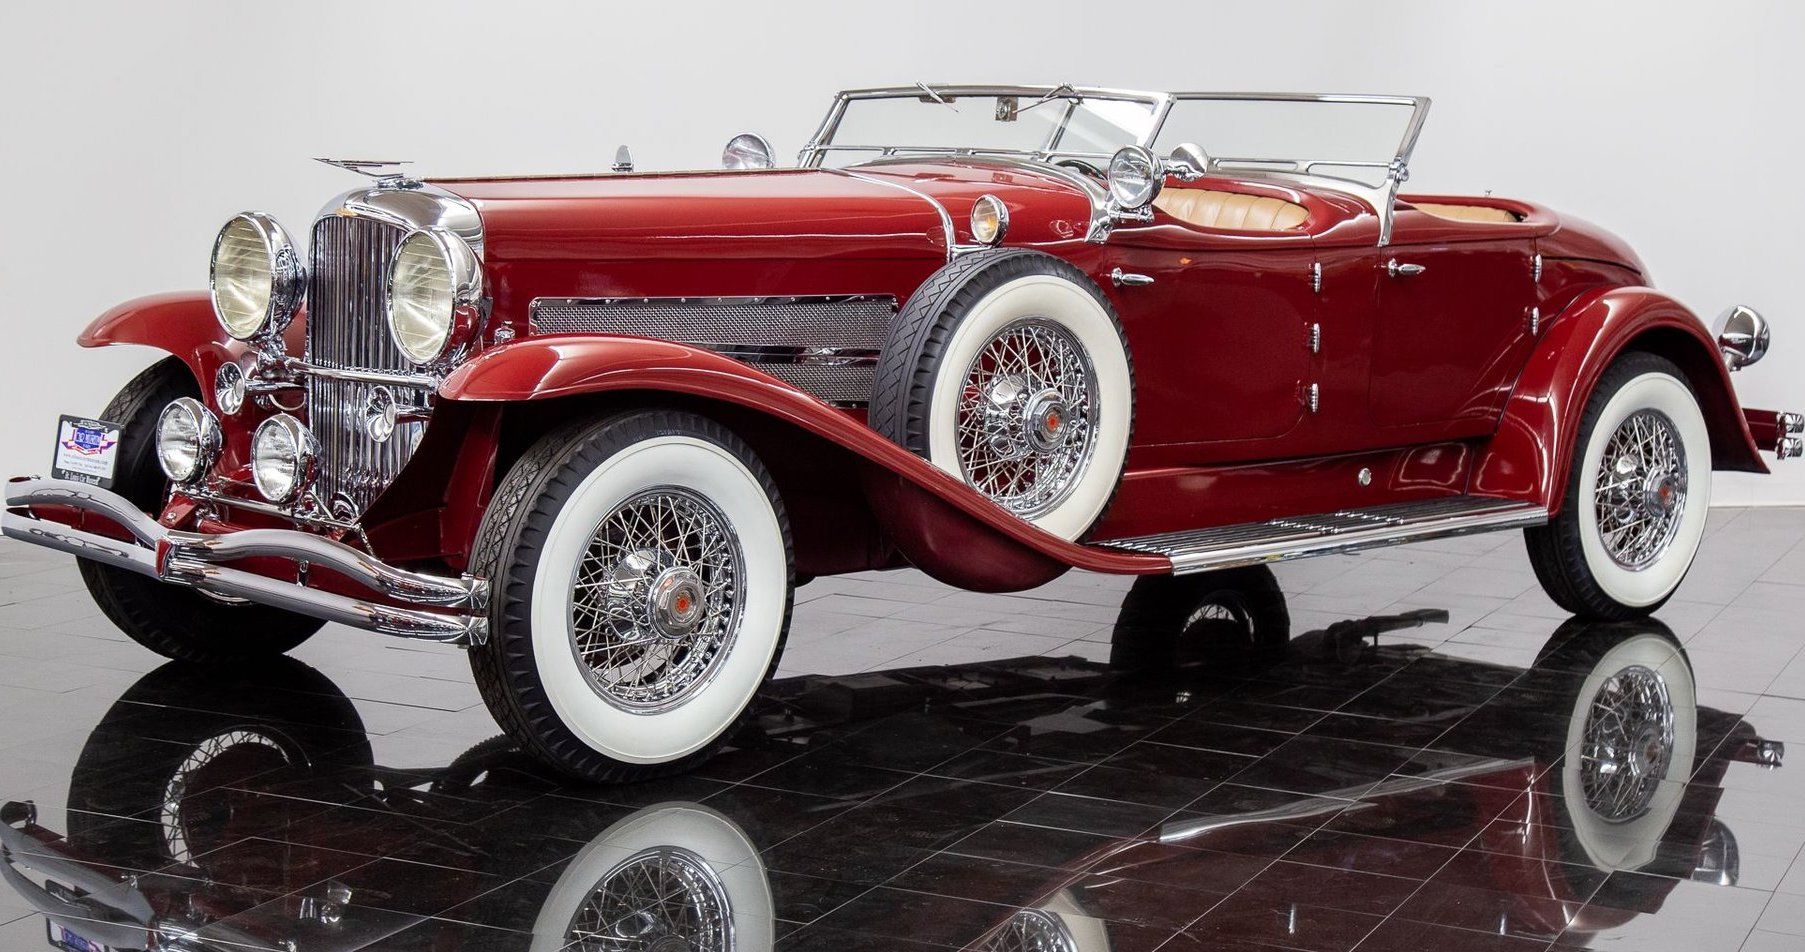 Some Of The Most Beautiful 1920s and 1930s Cars On The Planet